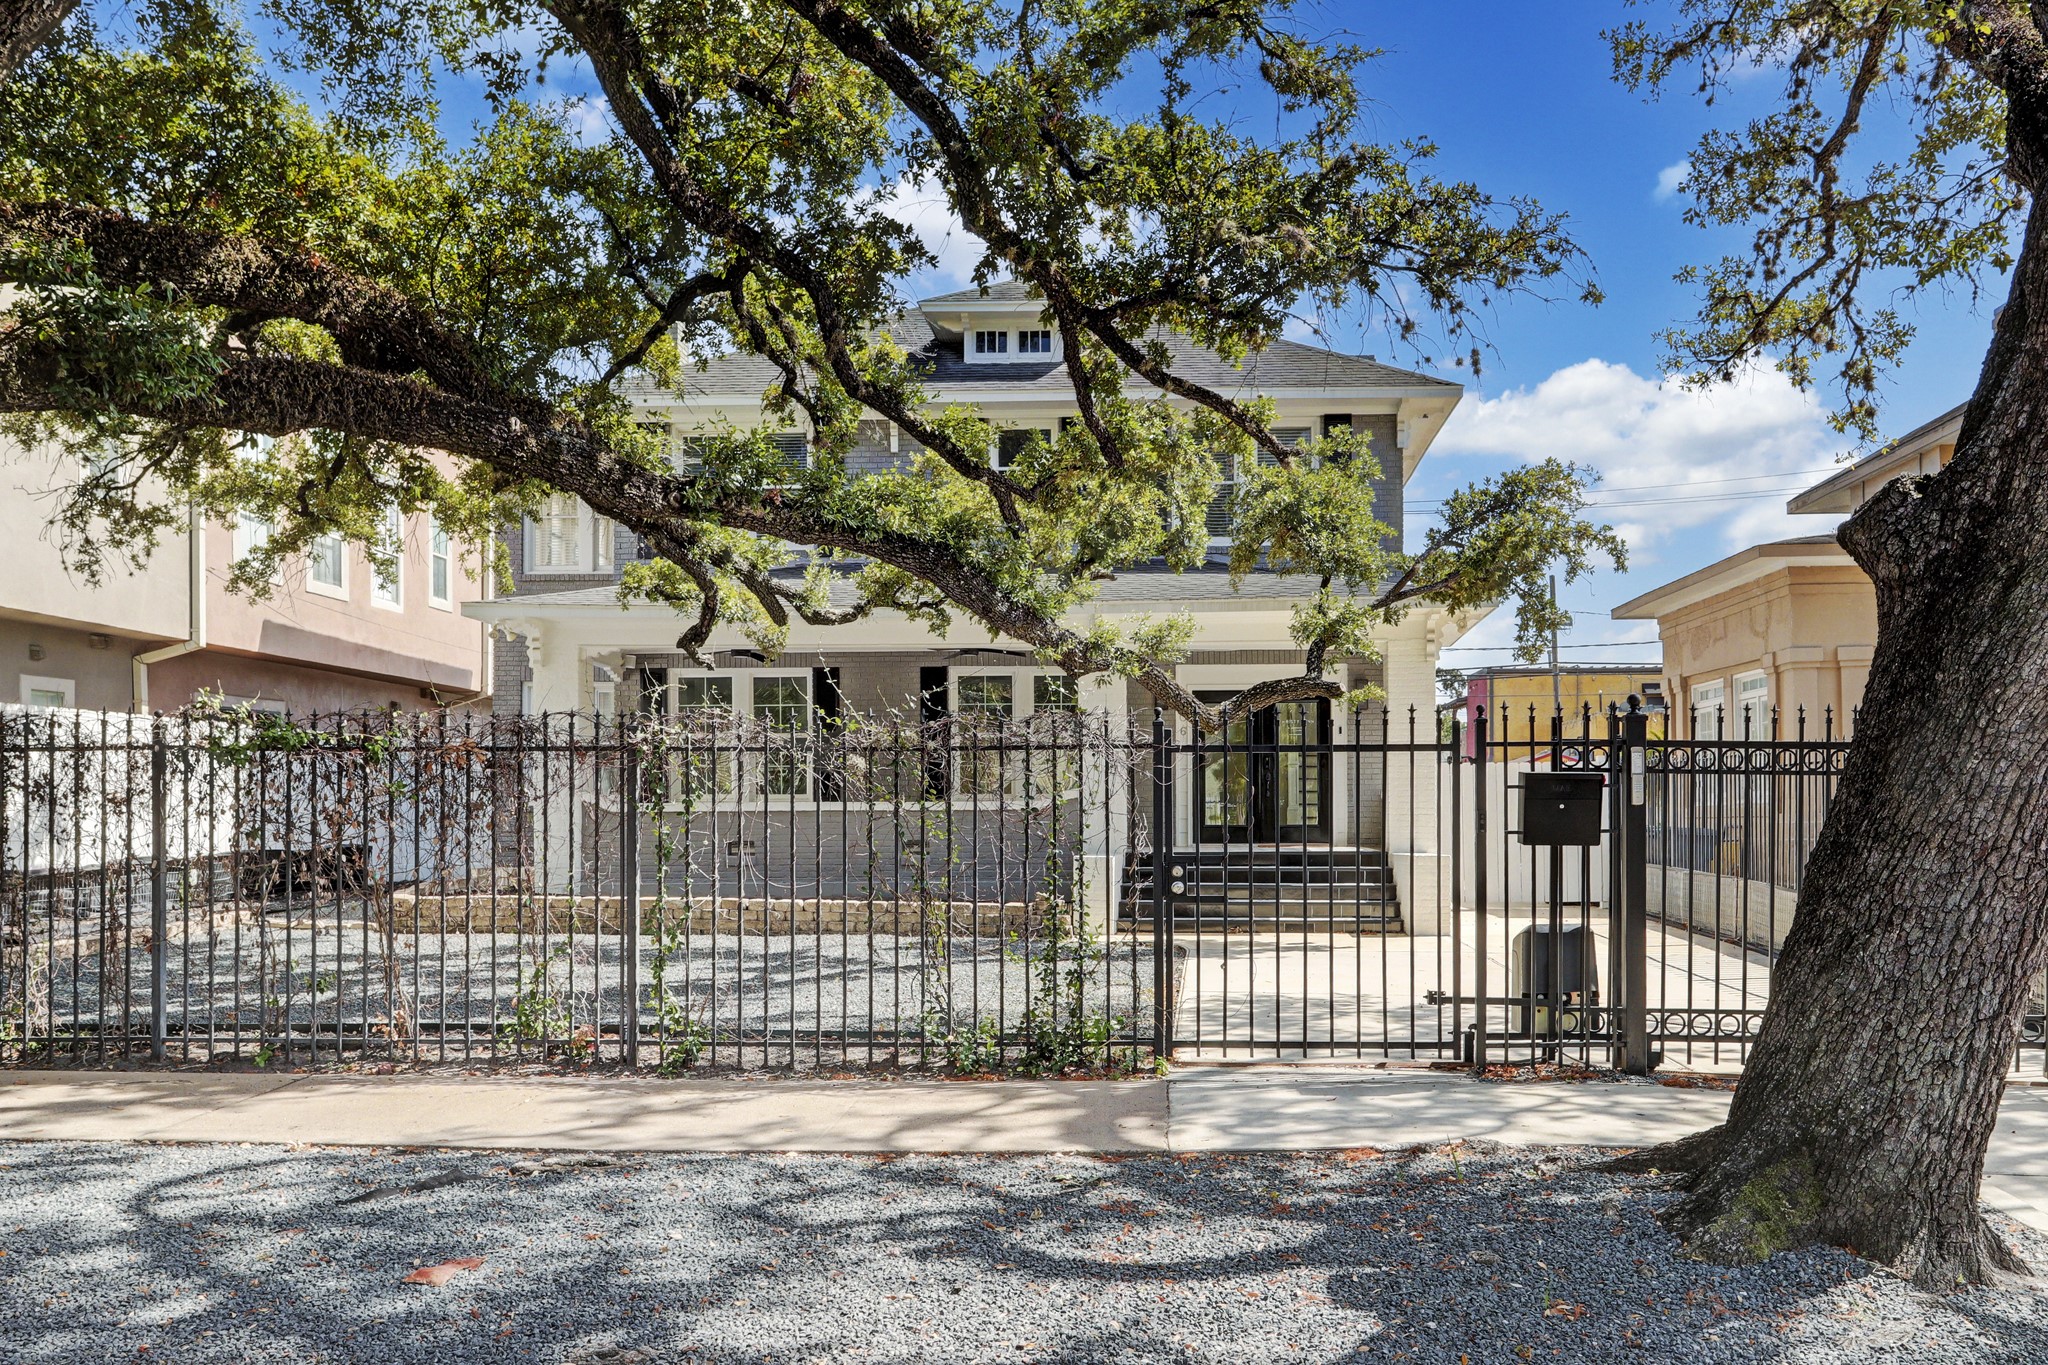 SURROUNDED BY MAGNIFICENT, MATURE OAK TREES, THE PRESENCE OF THIS HOME IS JAW DROPPING AND WILL MAKE ANY HOME OR BUSINESS A SANCTUARY! THE PROPERTY IS WRAPPED IN AN ELEGANT WROUGHT IRON FENCE AND AUTOMATIC SECURITY GATE. A LOW MAINTENANCE FRONT YARD WITH STABILIZED GRAVEL PROVIDES AMPLE PARKING.